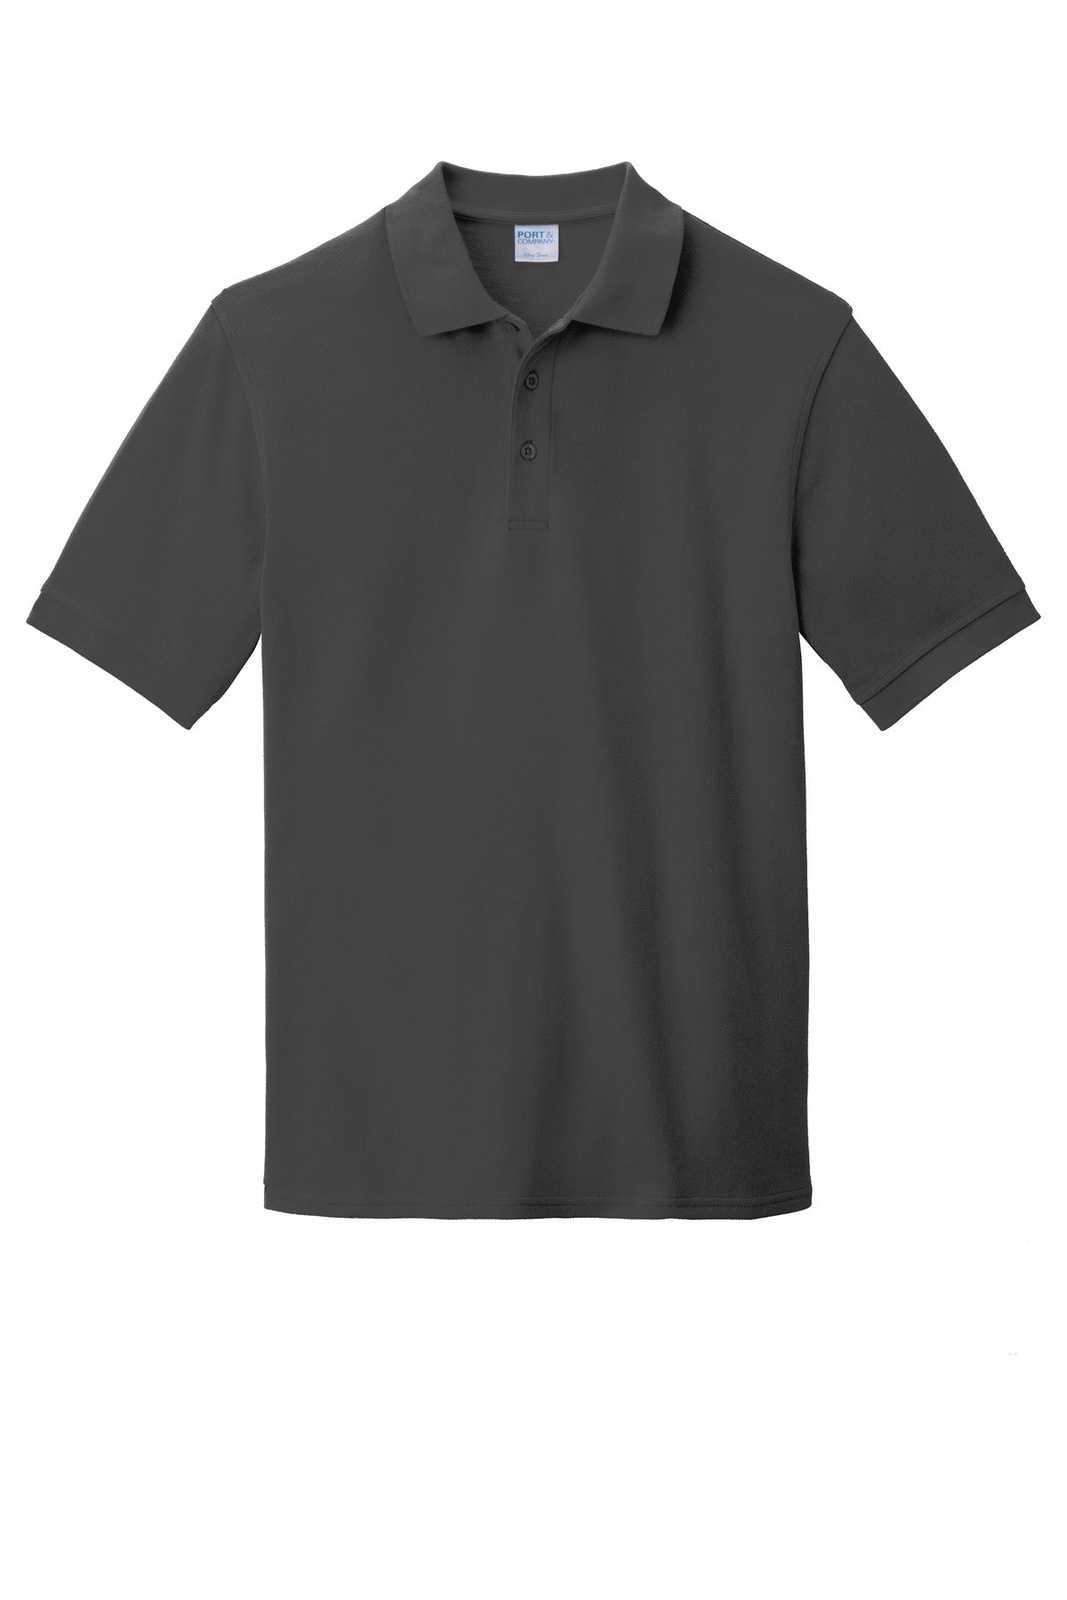 Port &amp; Company KP1500 Combed Ring Spun Pique Polo - Charcoal - HIT a Double - 5